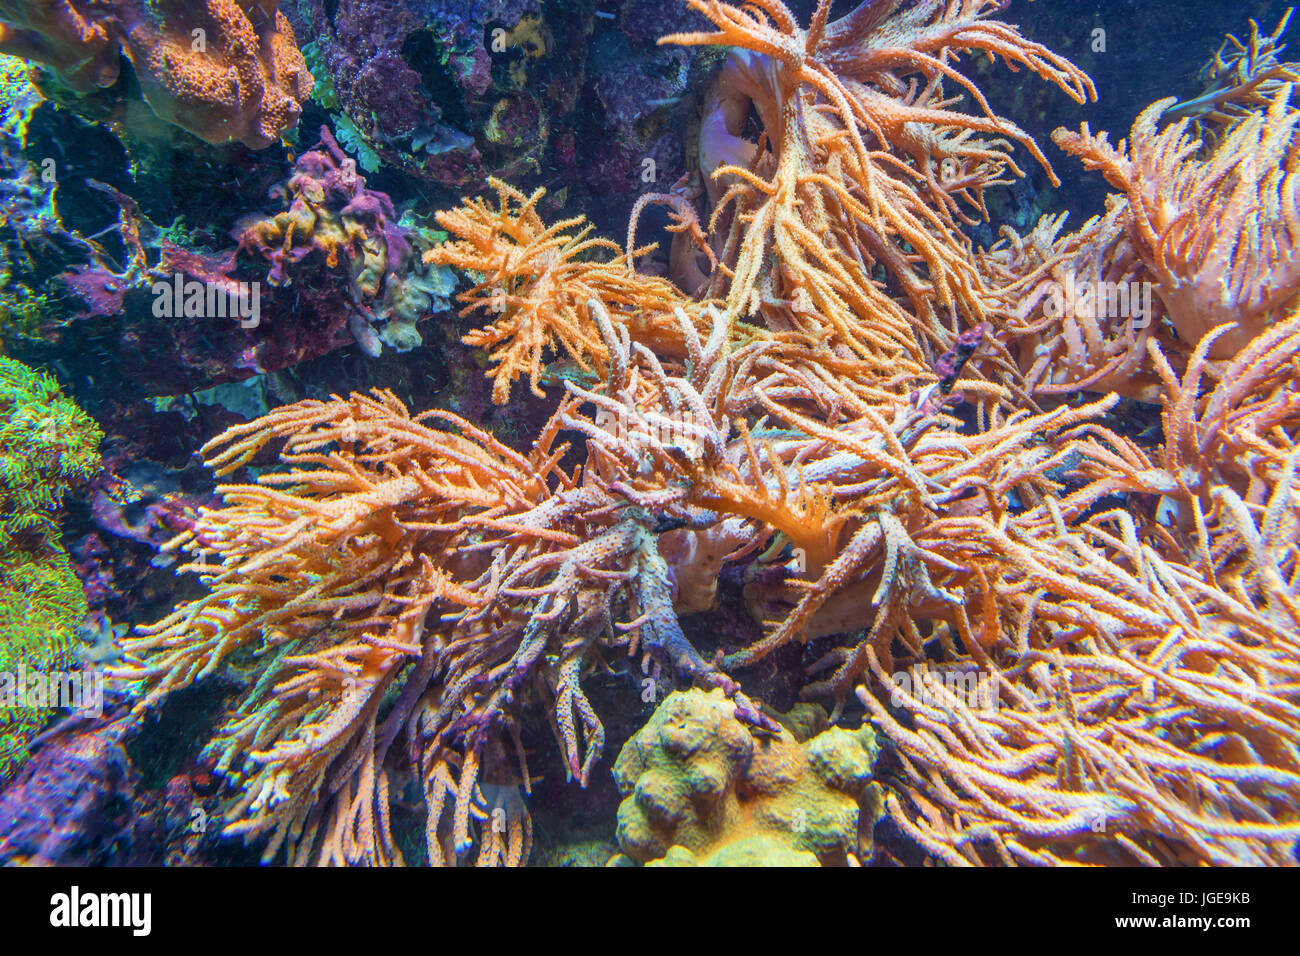 Underwater shot, fish in an aquarium with coral and sea anemone. Stock Photo